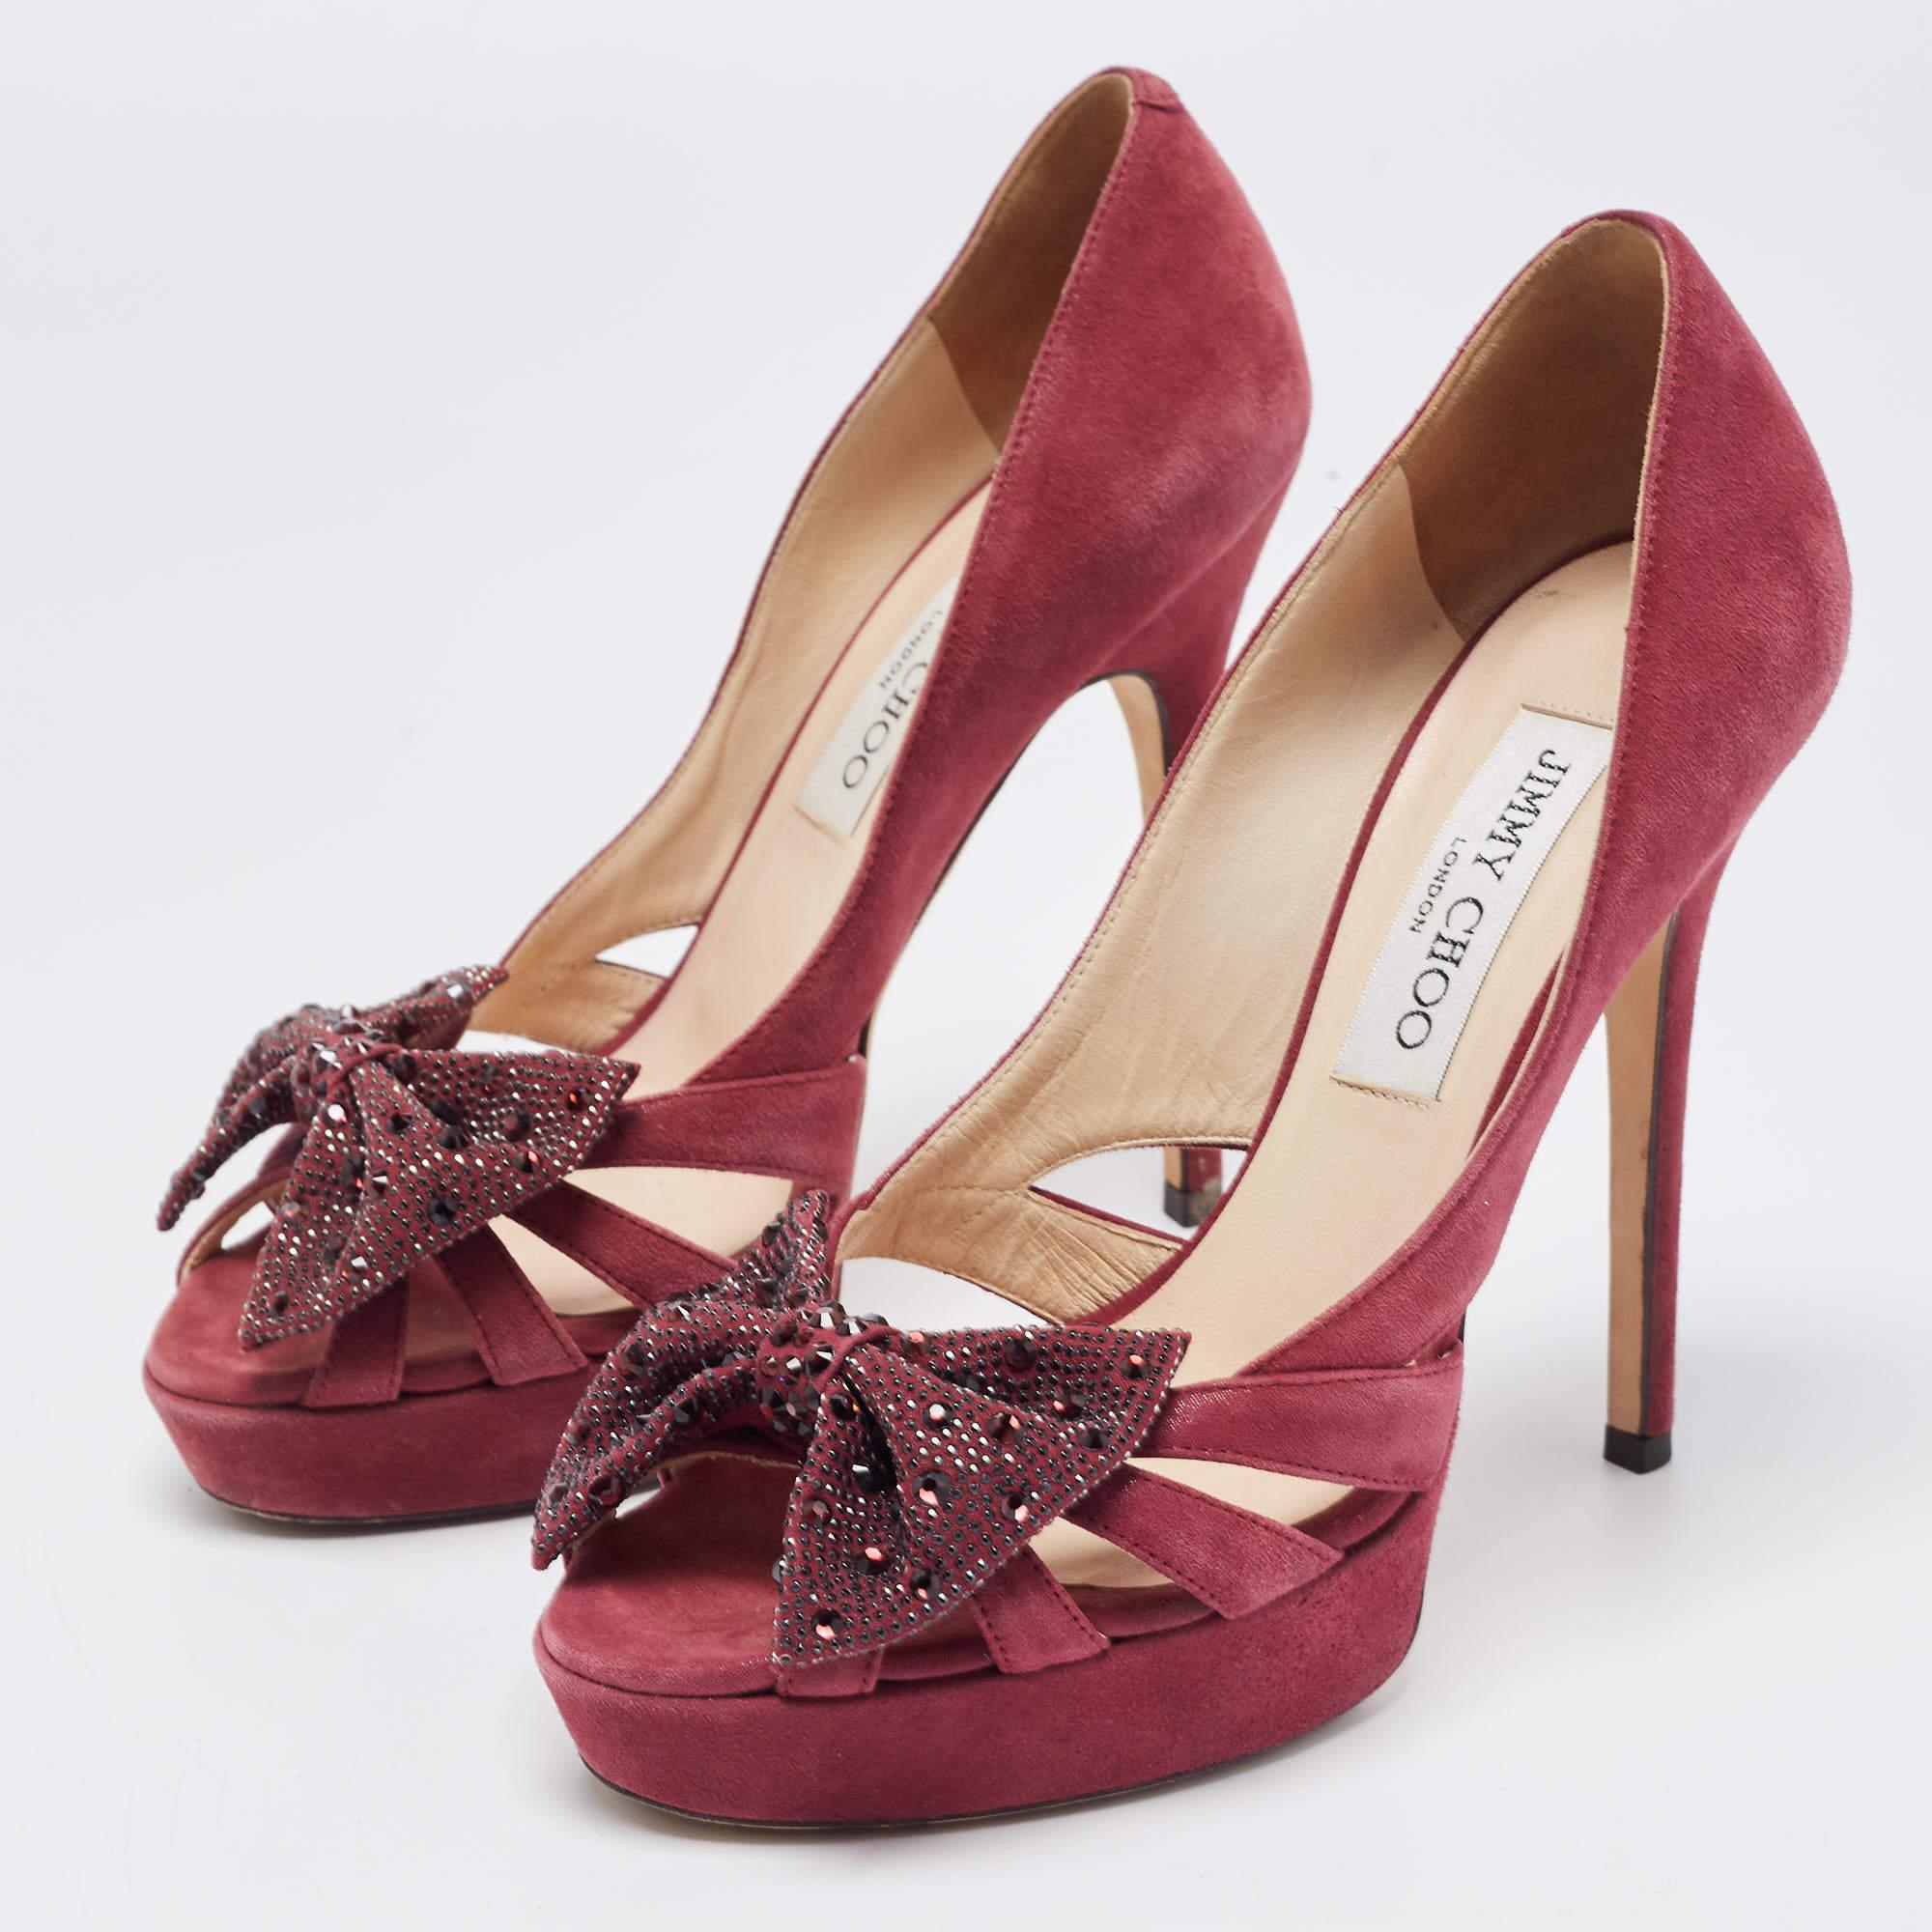 Fall head over heels in love with this pair of purple pumps from Jimmy Choo. Crafted from suede and styled with stiletto heels, they carry a glorious exterior with cutouts and a stunning crystal embellished bow that will catch glances. The pumps are